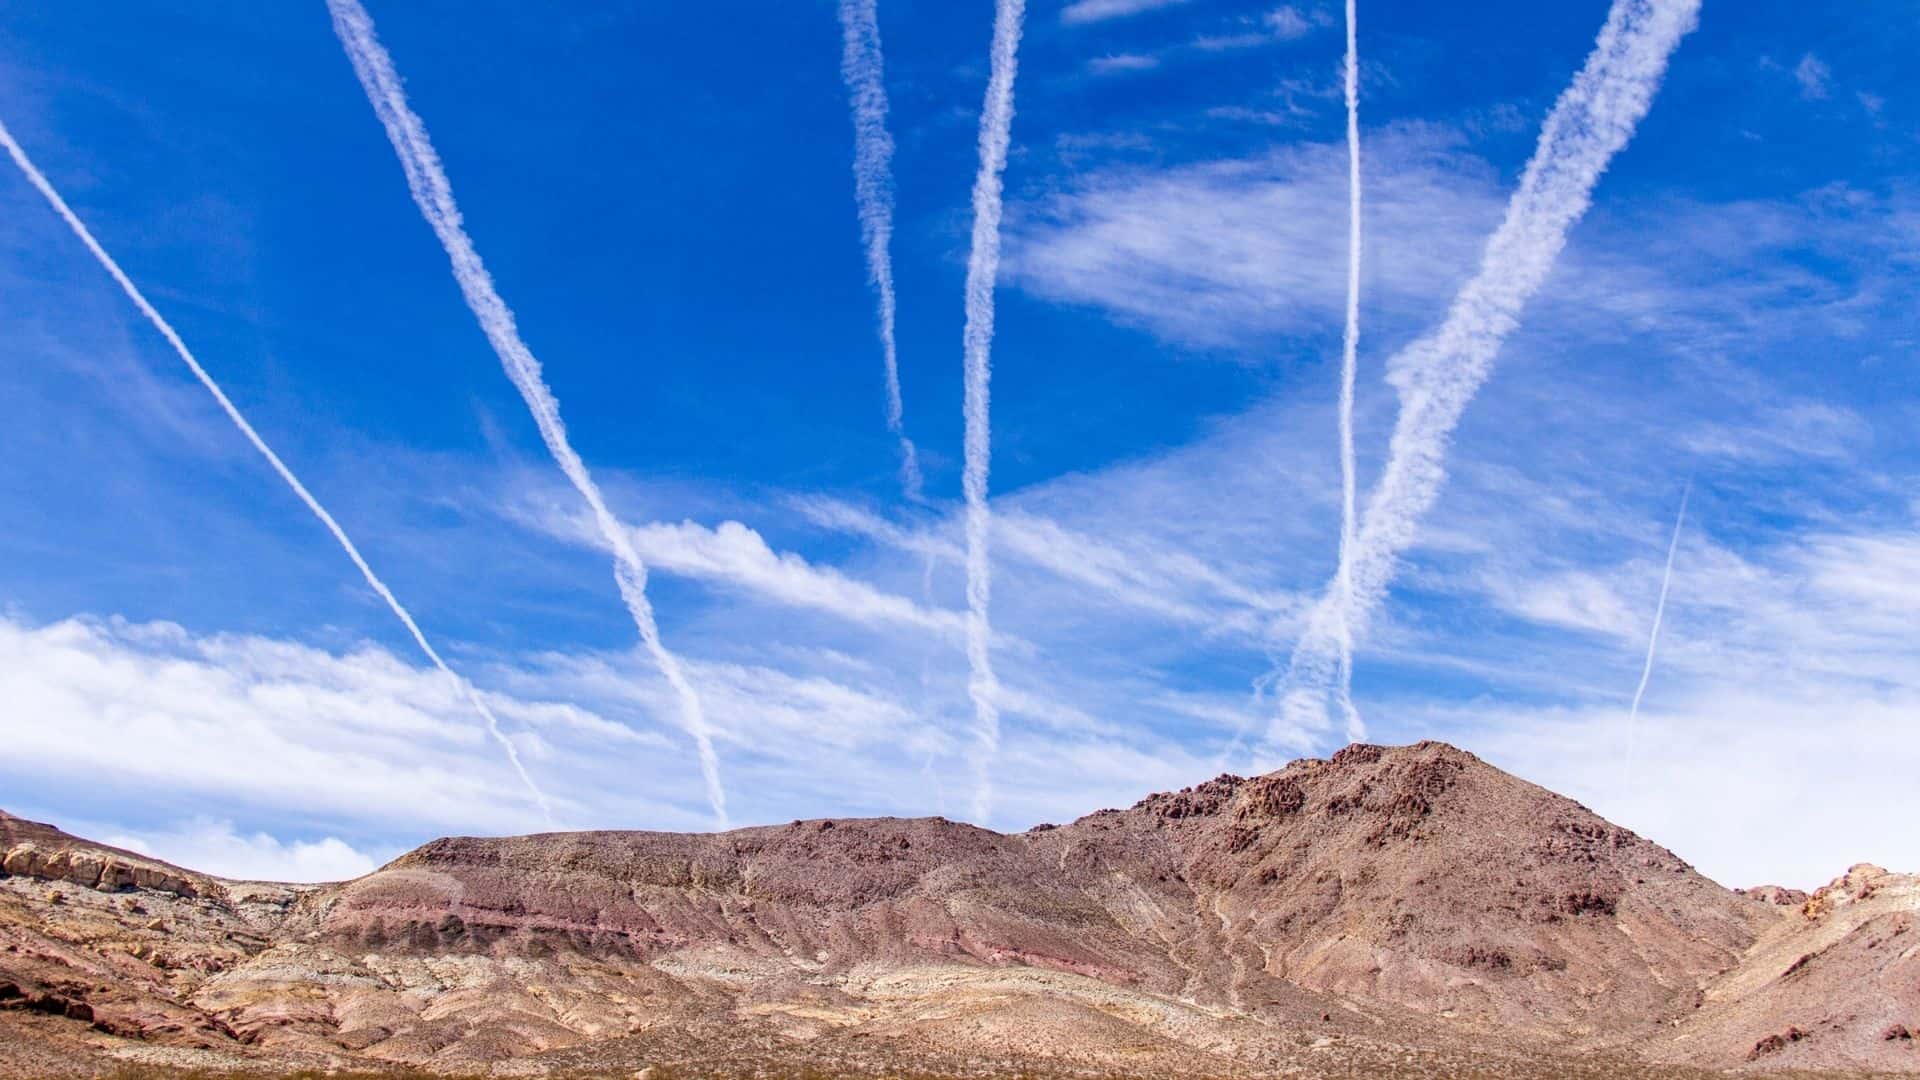 Why do planes leave trails